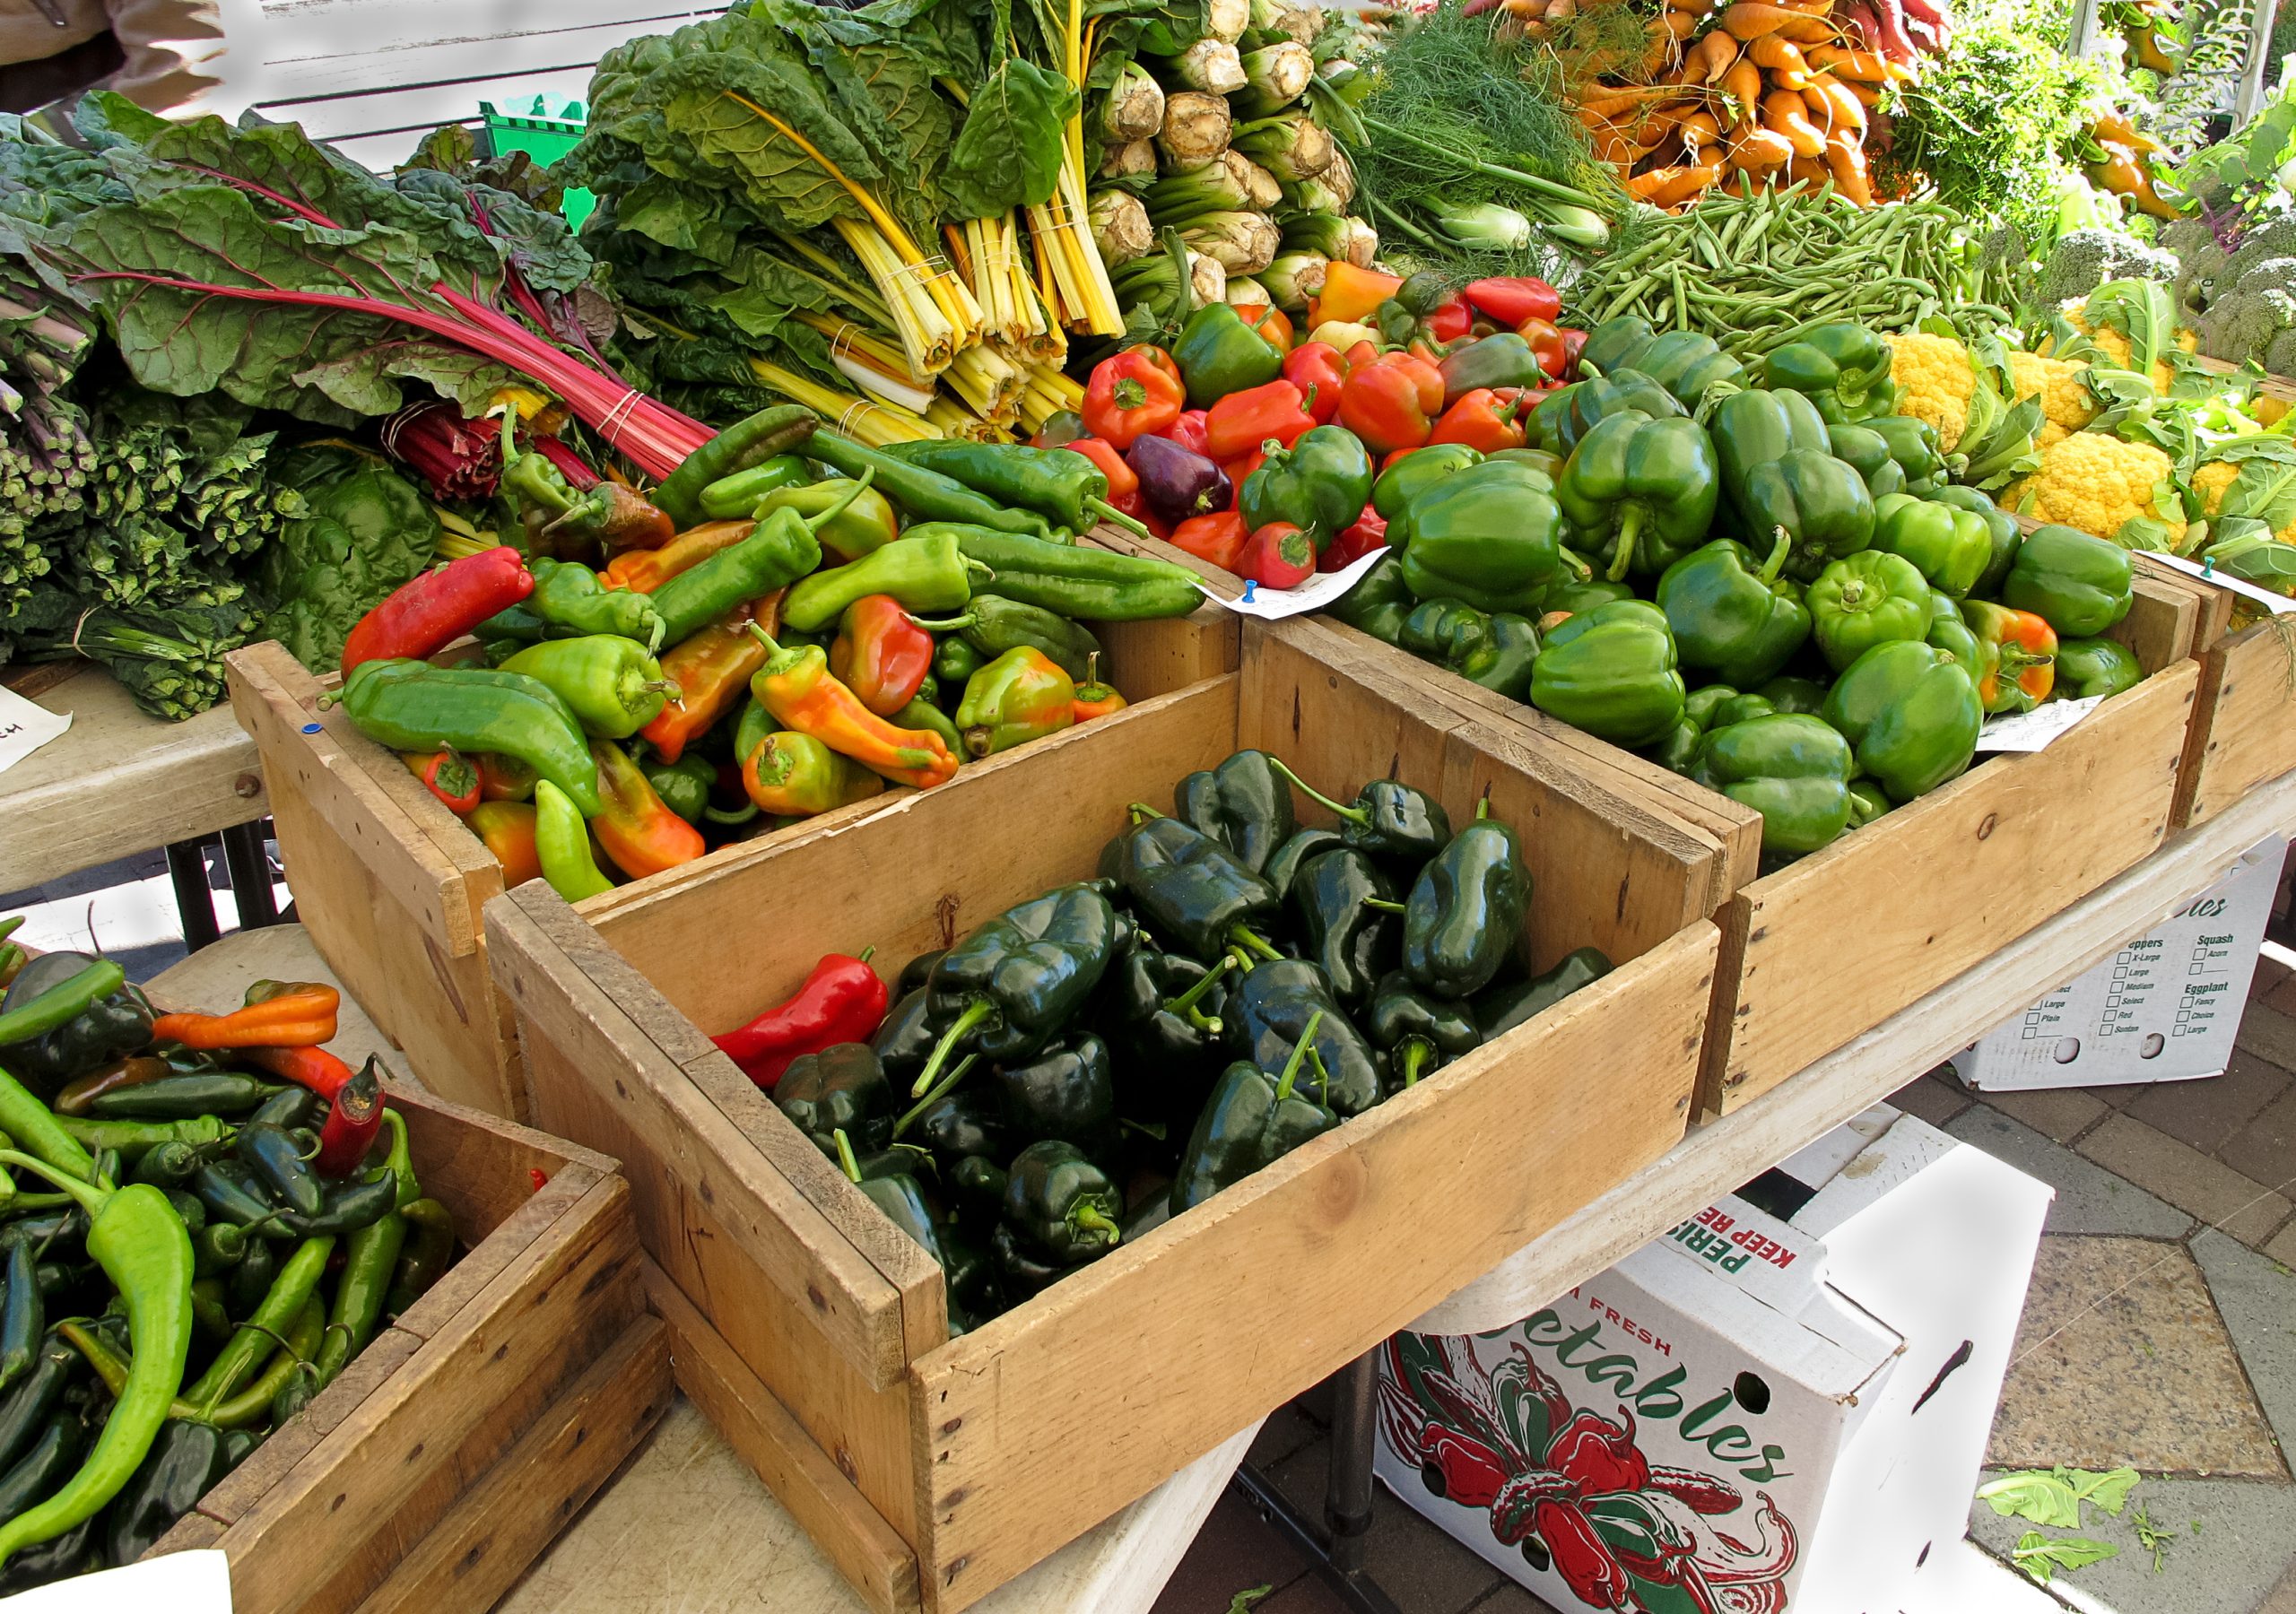 image of organic produce at a farmers market